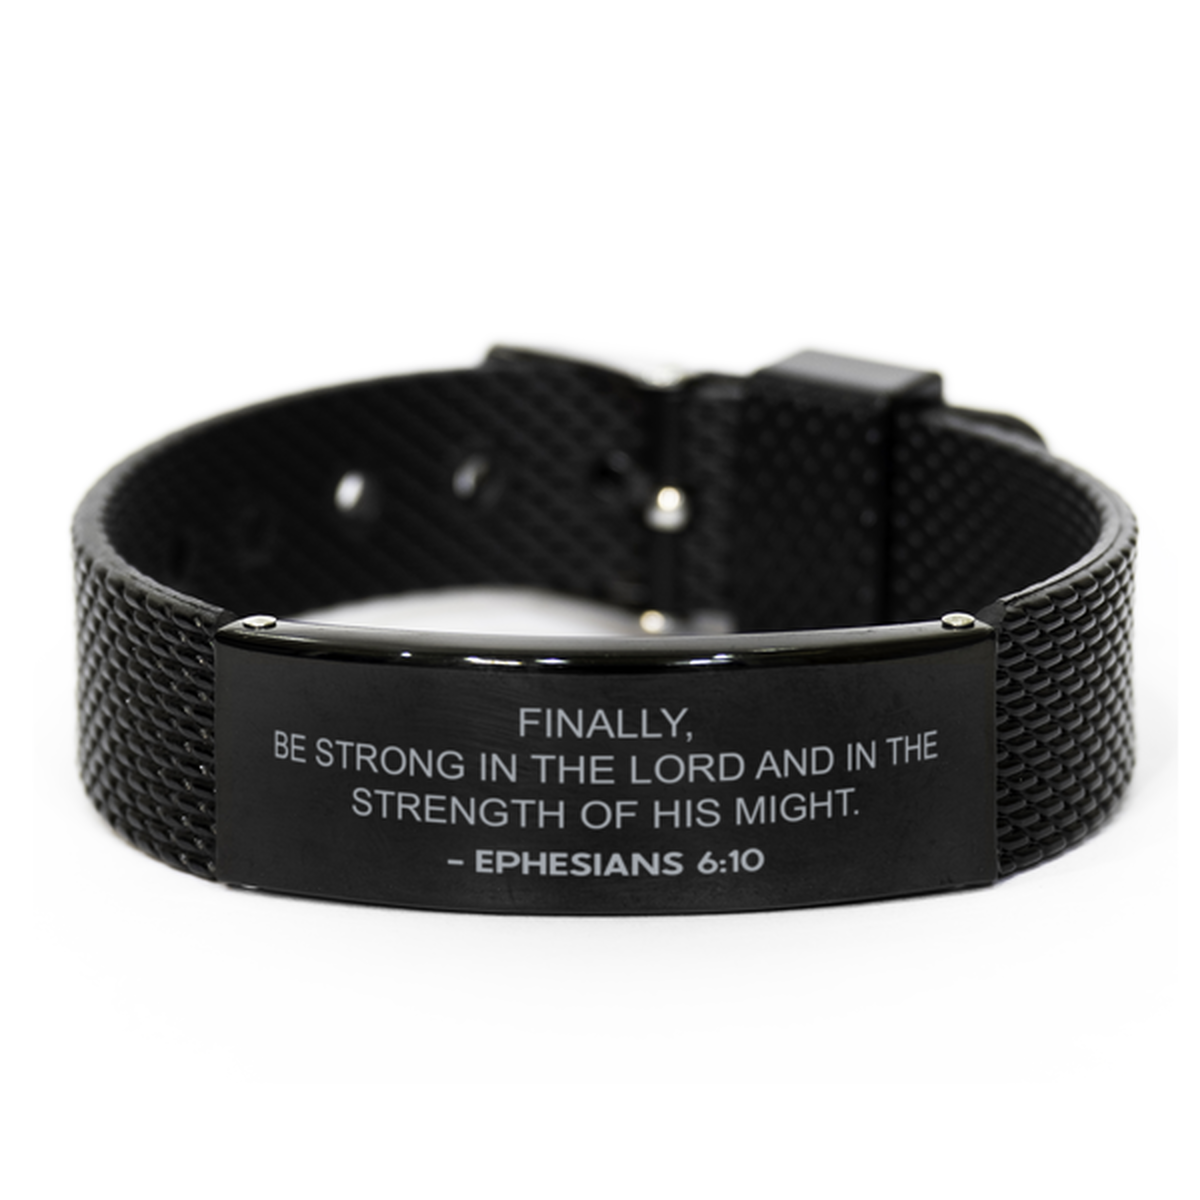 Christian Black Bracelet,, Ephesians 6:10 Finally, Be Strong In The Lord And In The, Motivational Bible Verse Gifts For Men Women